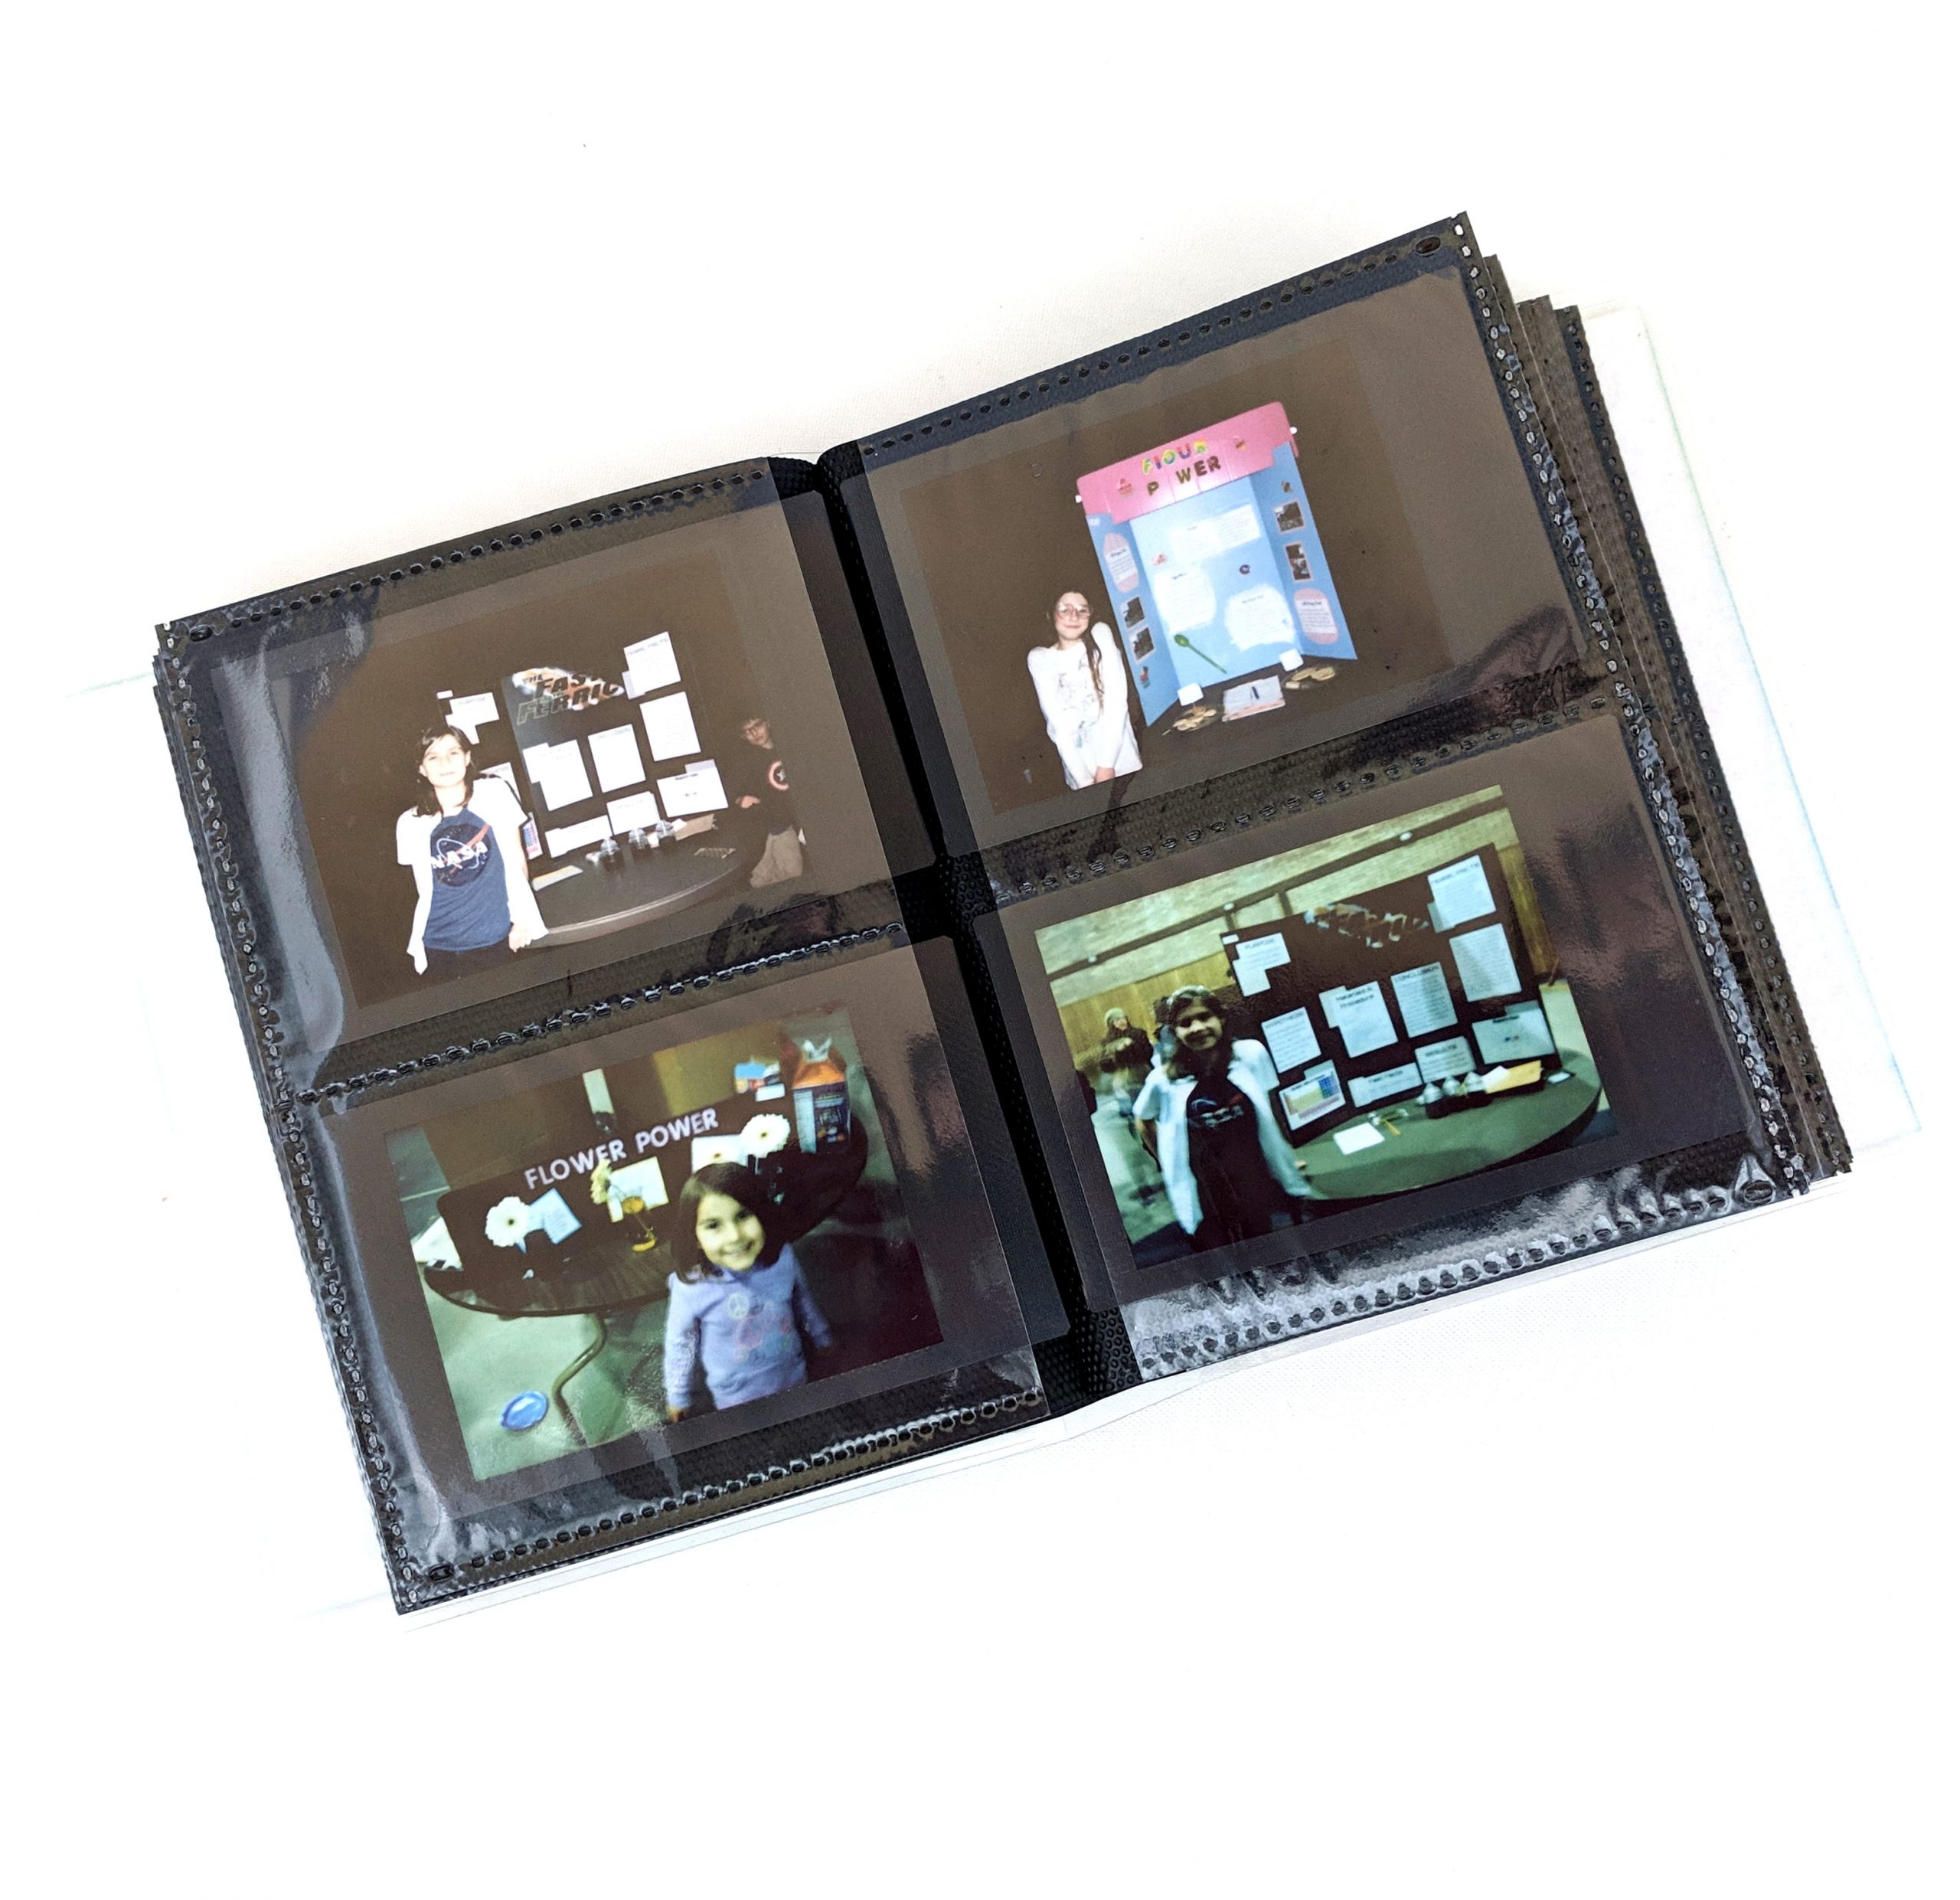 Instax Mini Photo Albums Pack of 3, Each Mini Album Holds Up to 192 2.1” x  3.4” Photos in Black Pockets - CocoPolka Company